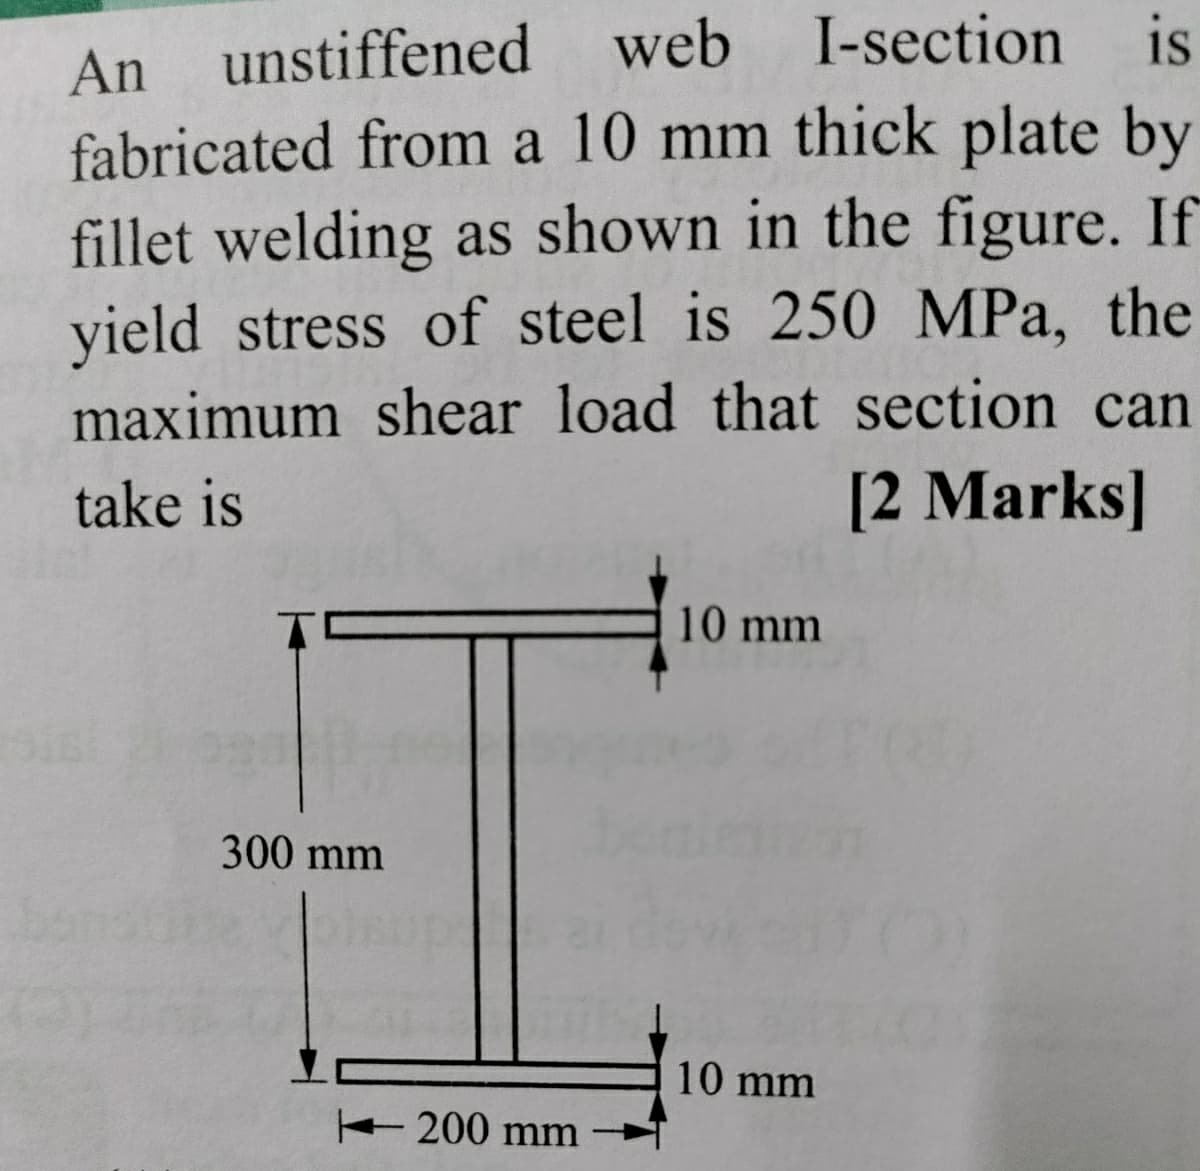 An unstiffened web I-section
fabricated from a 10 mm thick plate by
fillet welding as shown in the figure. If
yield stress of steel is 250 MPa, the
maximum shear load that section can
is
take is
[2 Marks]
10 mm
300 mm
10 mm
200 mm
